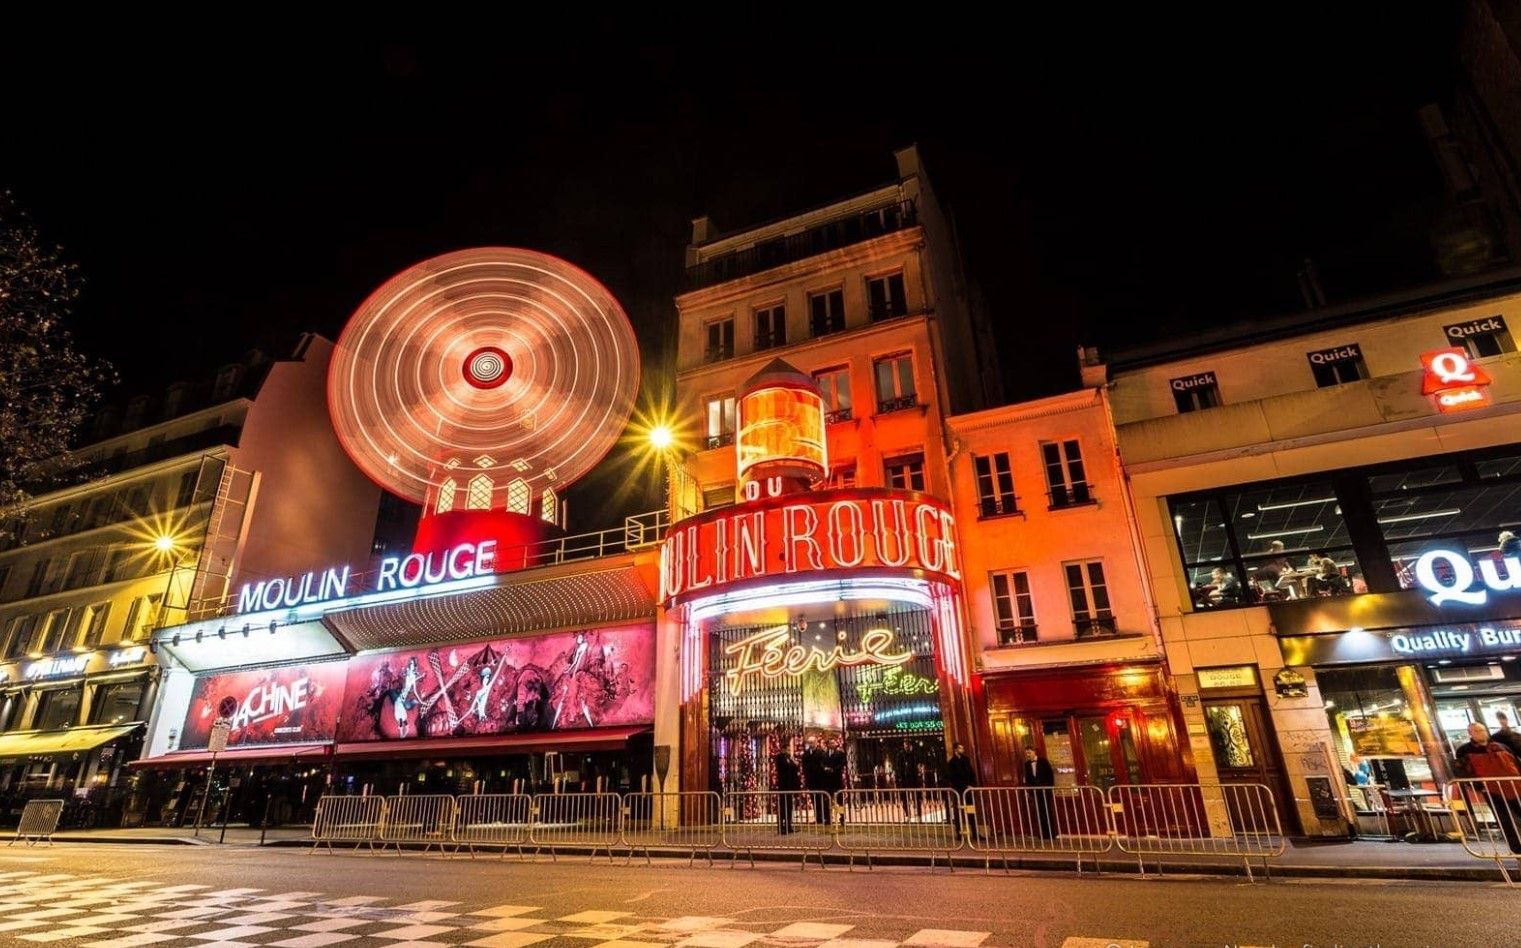 Moulin Rouge - Things To Do at Aquatics Centre Paris Olympics 2024 | Top Attractions, Night Life, Restaurants